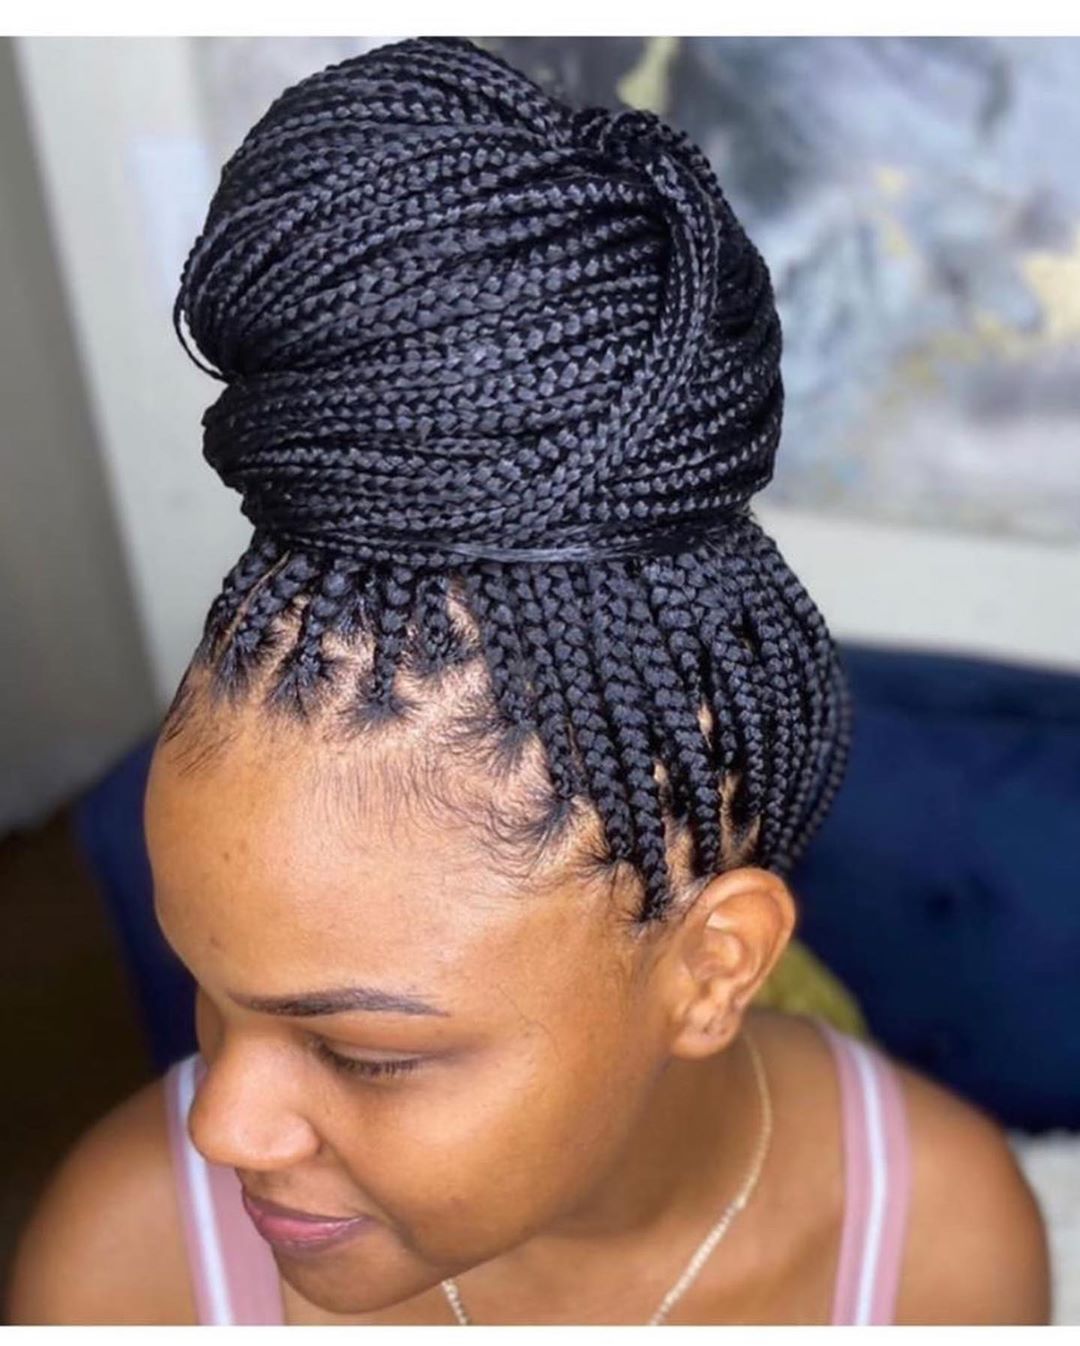 Latest Hairstyle For Ladies In Nigeria 2020: Most Trendy Hairstyles For  Ladies - Fashion - Nigeria